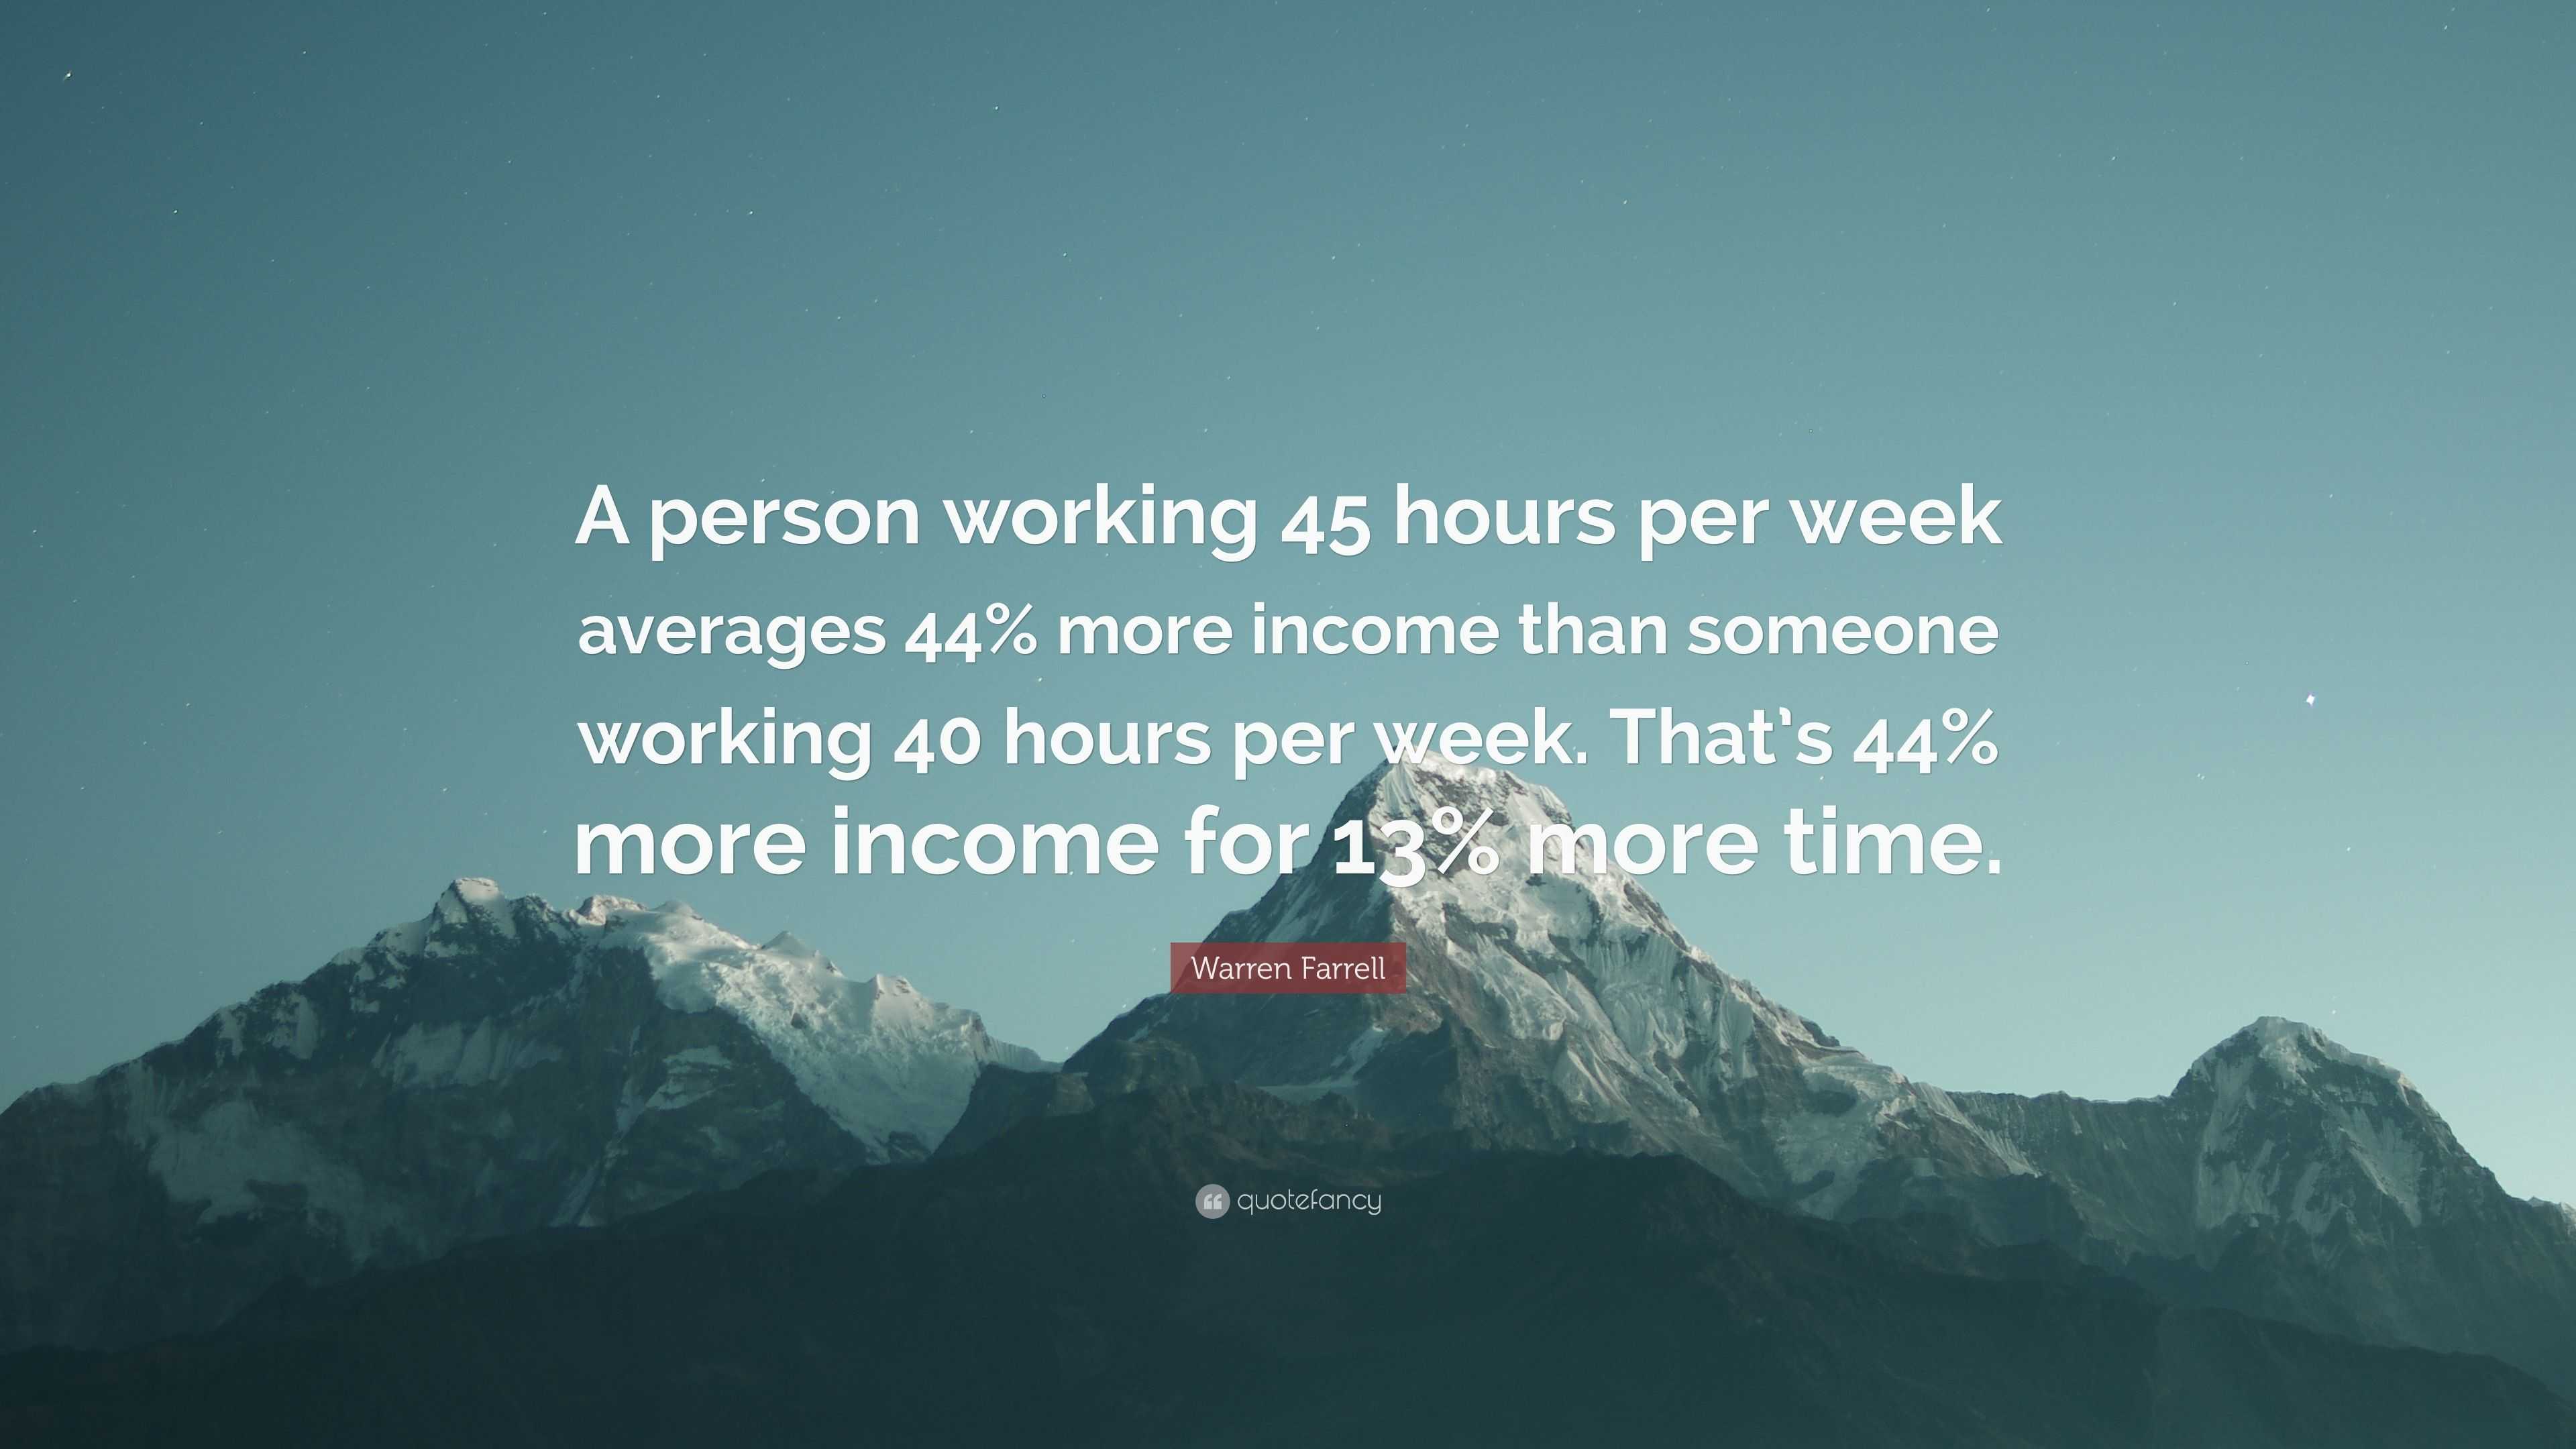 Warren Farrell Quote A Person Working 45 Hours Per Week Averages 44 More Income Than Someone Working 40 Hours Per Week That S 44 More Inco